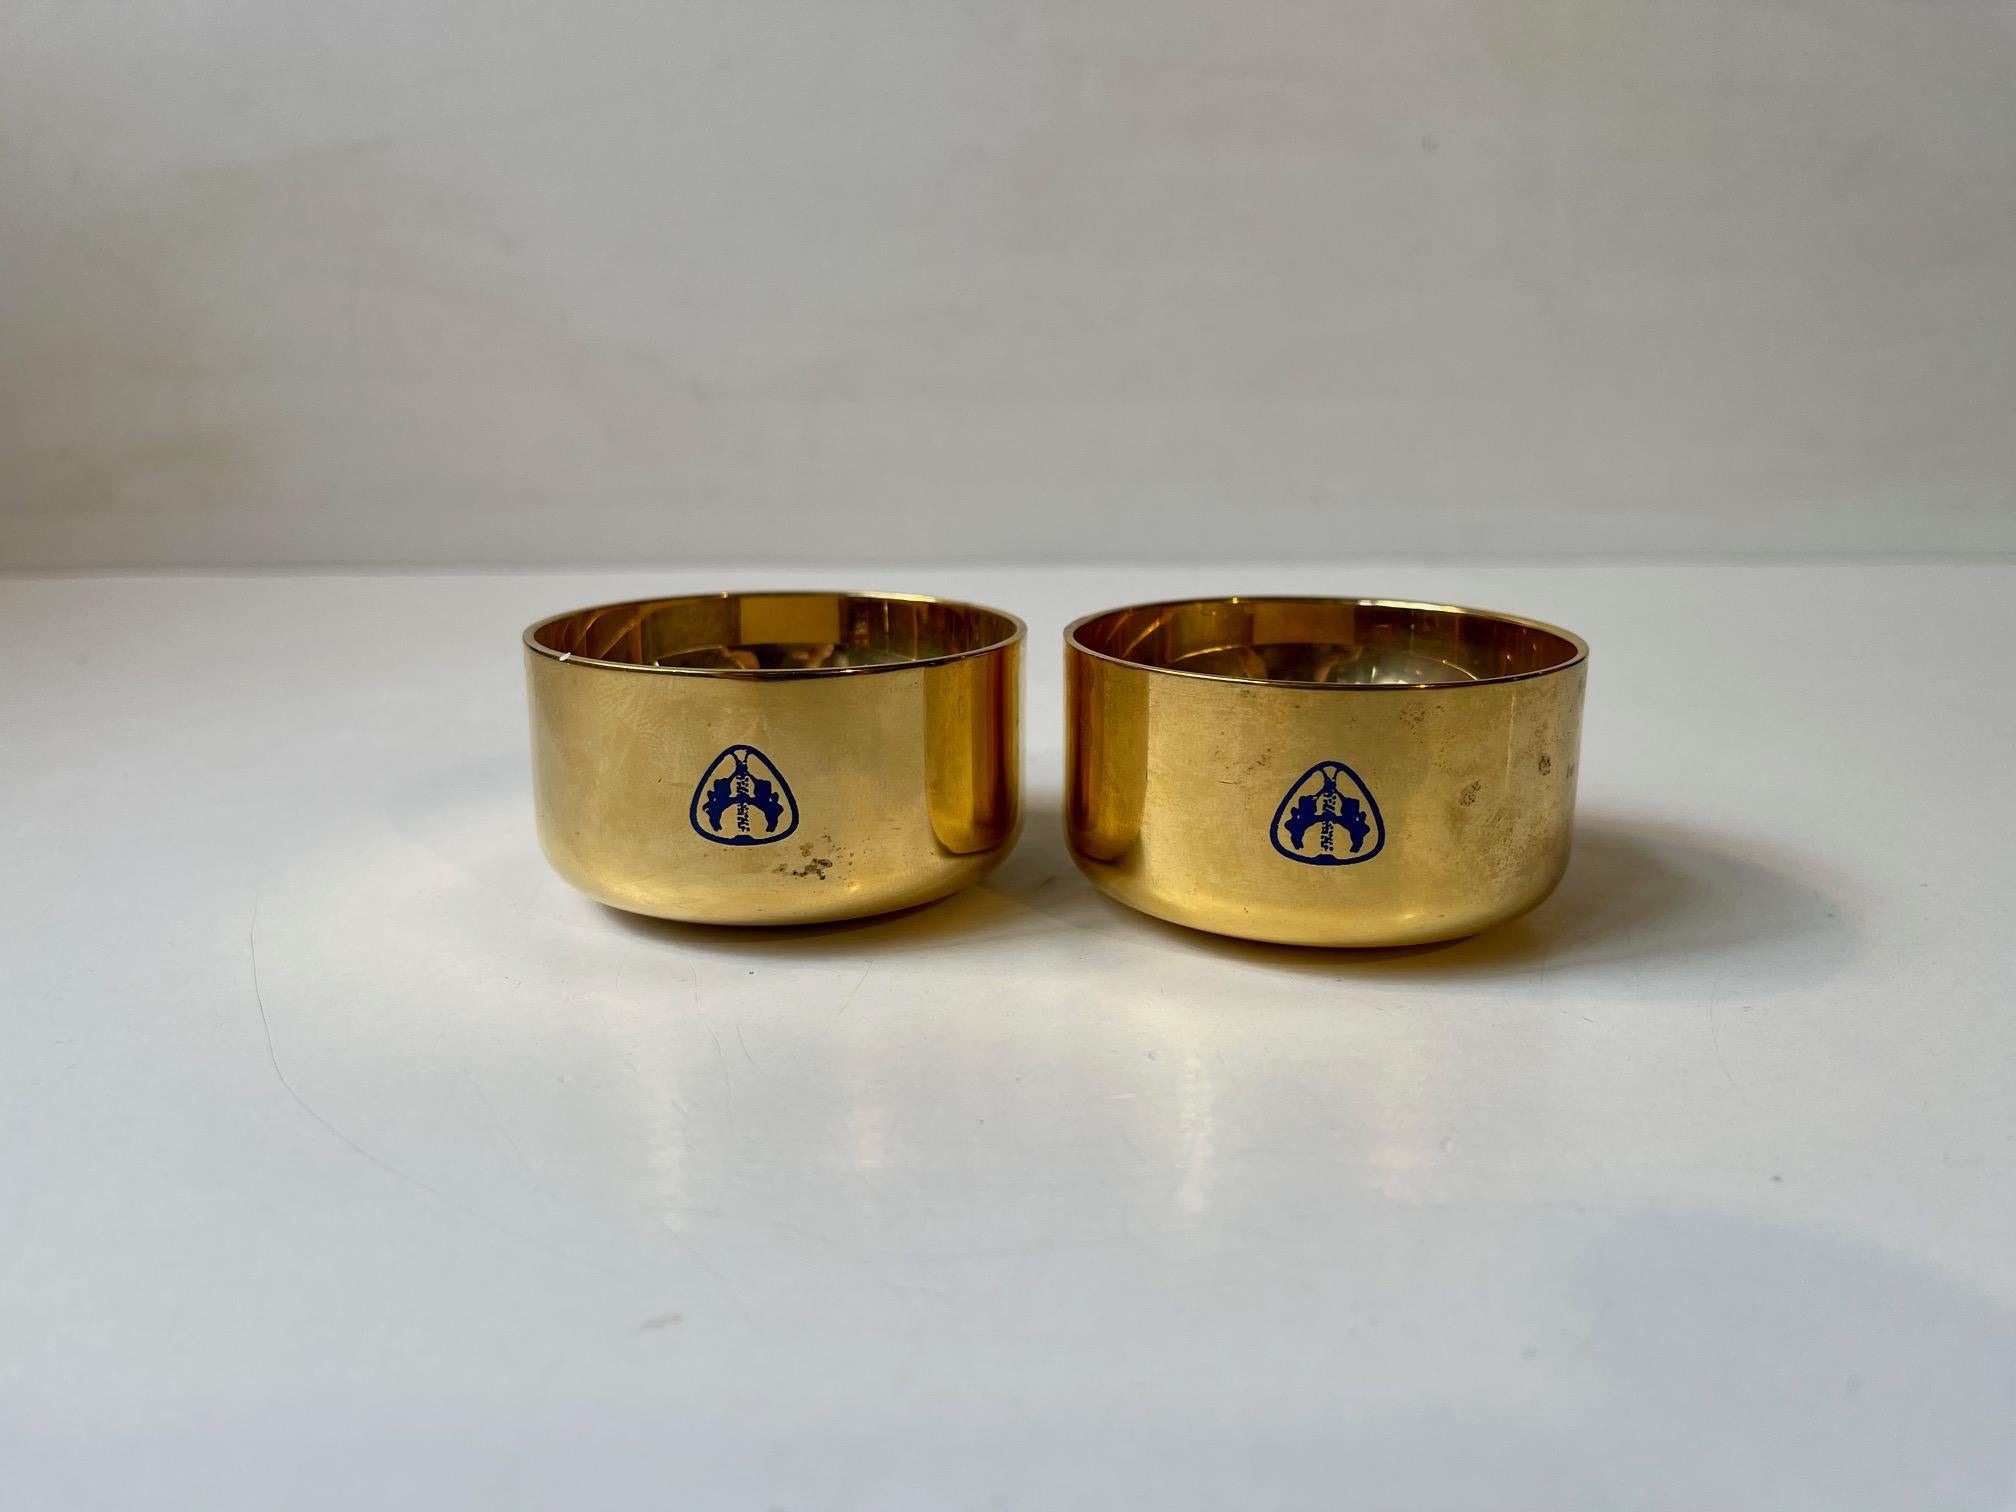 Mid-20th Century Gold Plated Tealight Candleholders by Pierre Forssell for Skultuna, Sweden 1960s For Sale